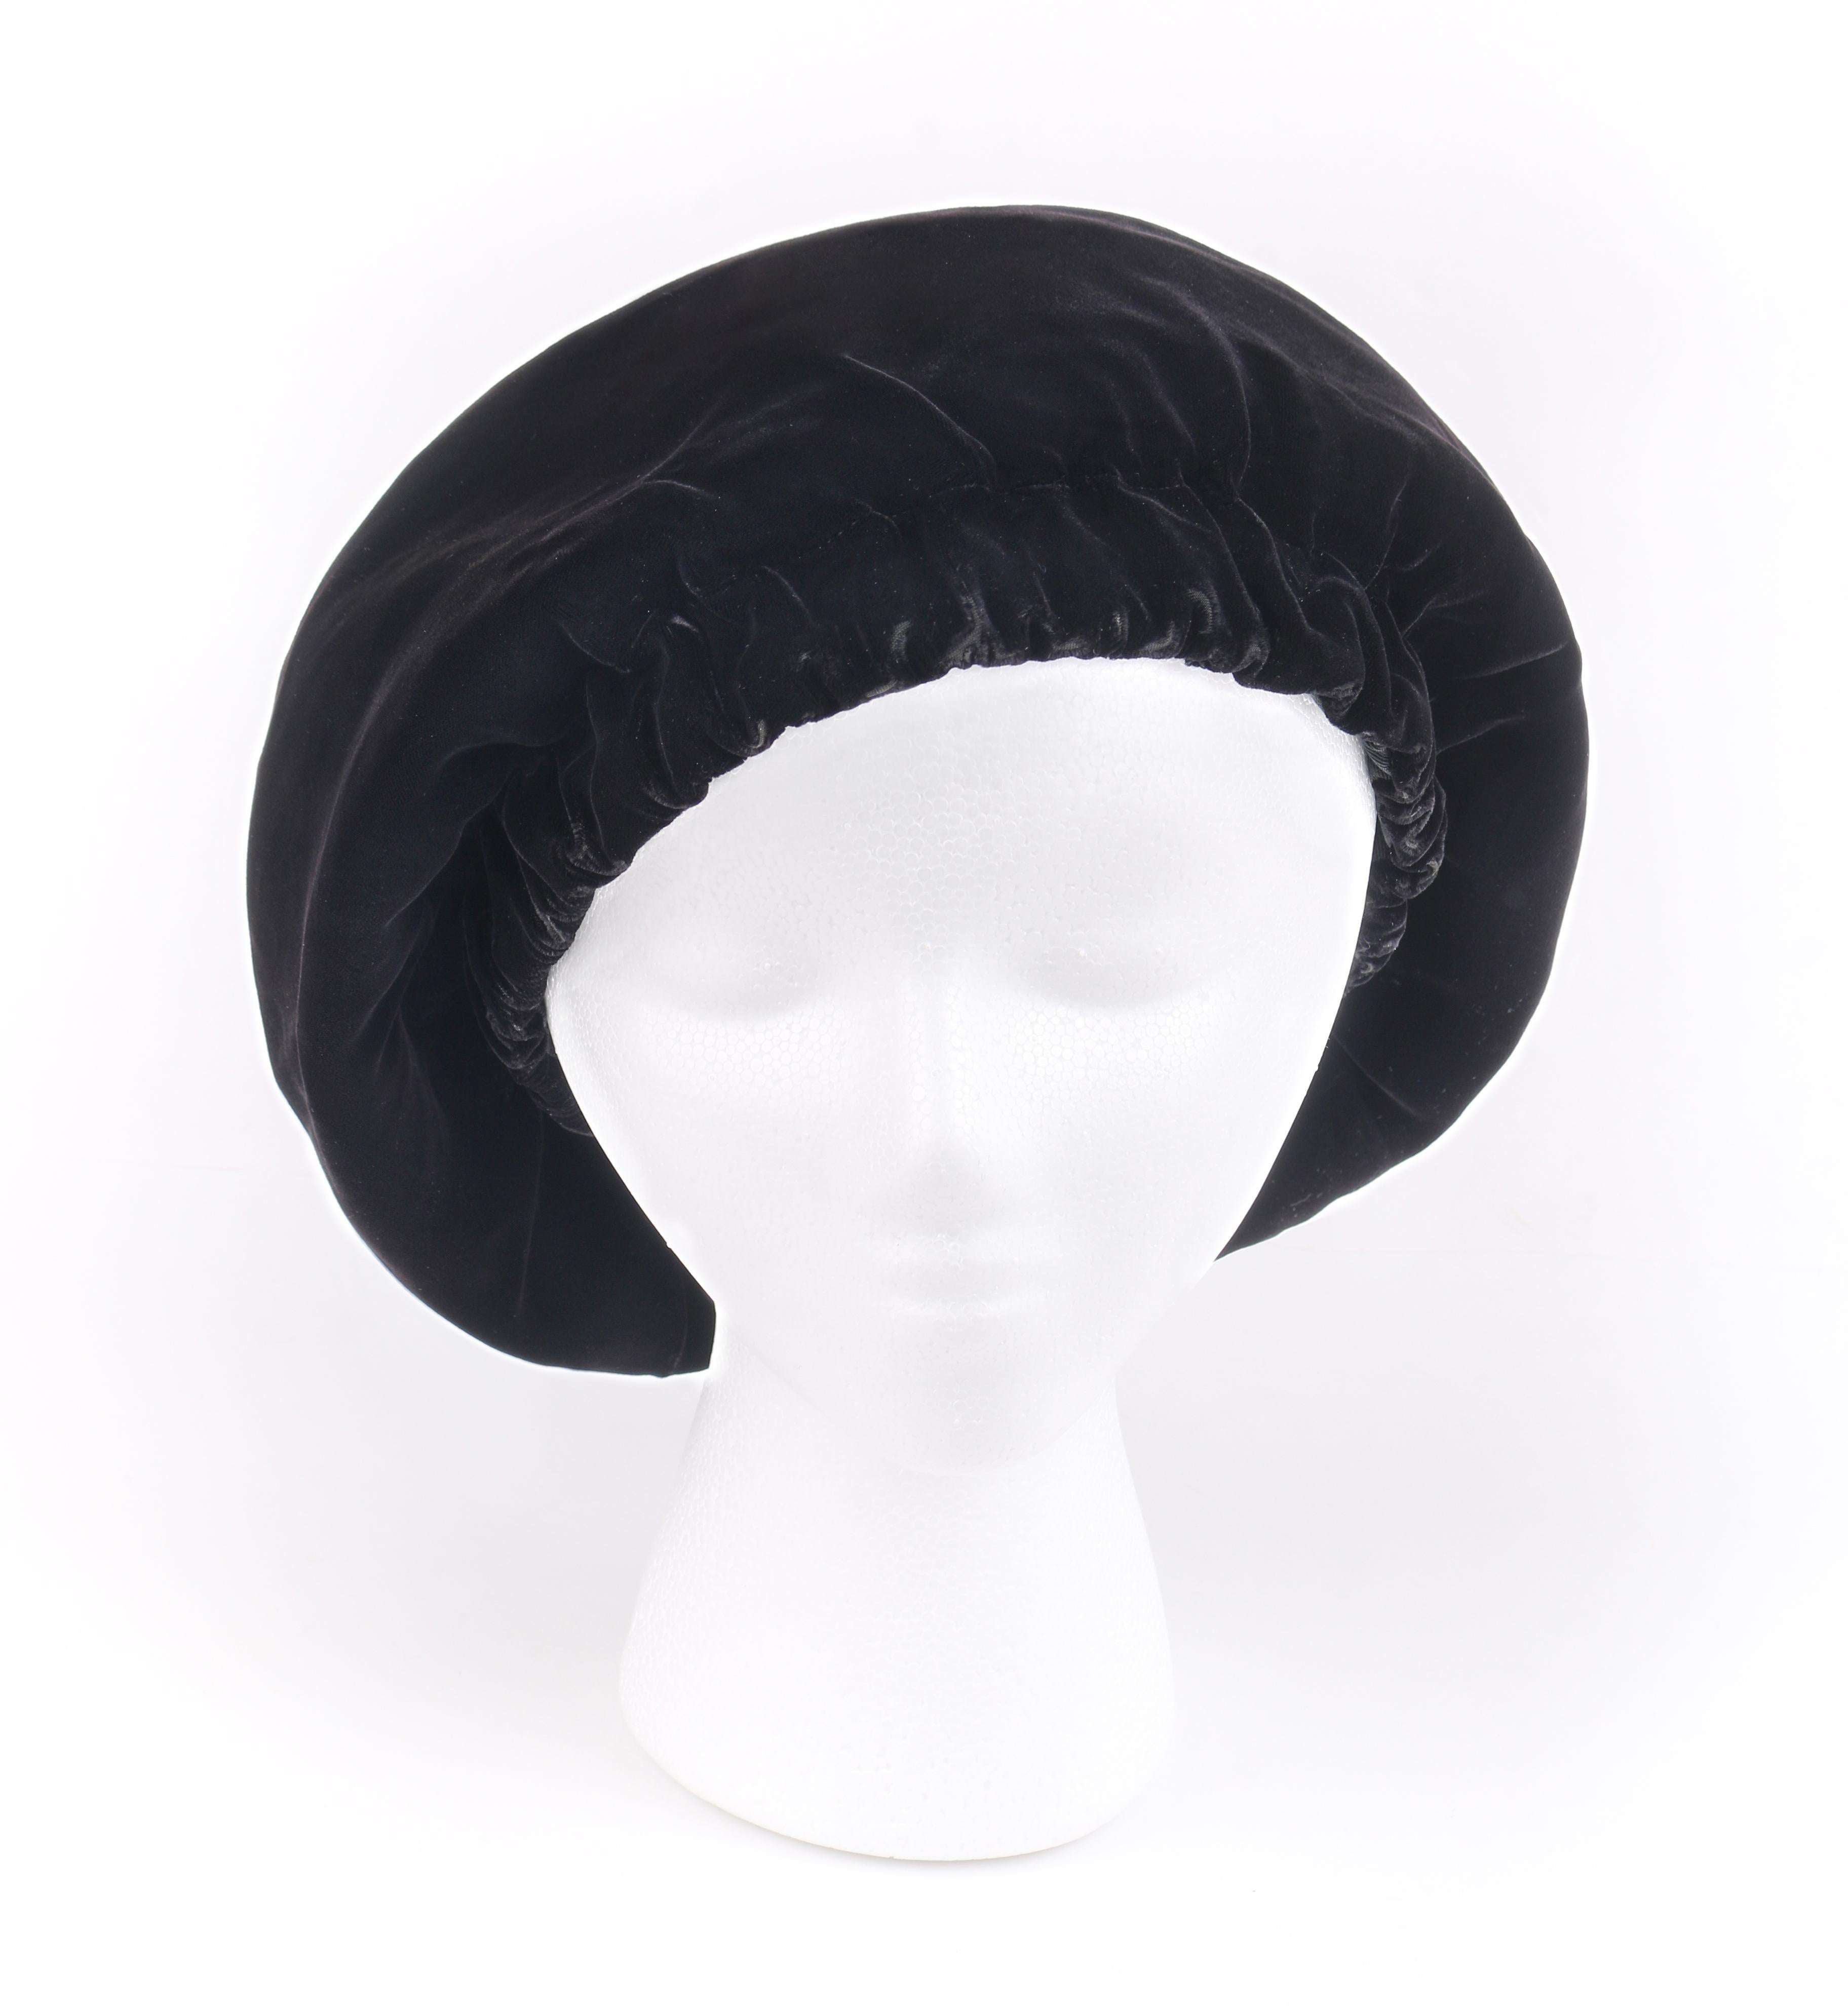 CHRISTIAN DIOR Chapeaux c.1960’s Marc Bohan Black Gathered Velvet Beret Hat
 
Circa: 1960’s
Labels: Christian Dior / Chapeaux / Paris - New York 
Designer: Marc Bohan
Style: Beret 
Color(s): Black
Lined: Yes 
Unmarked Fabric Content (feel of):